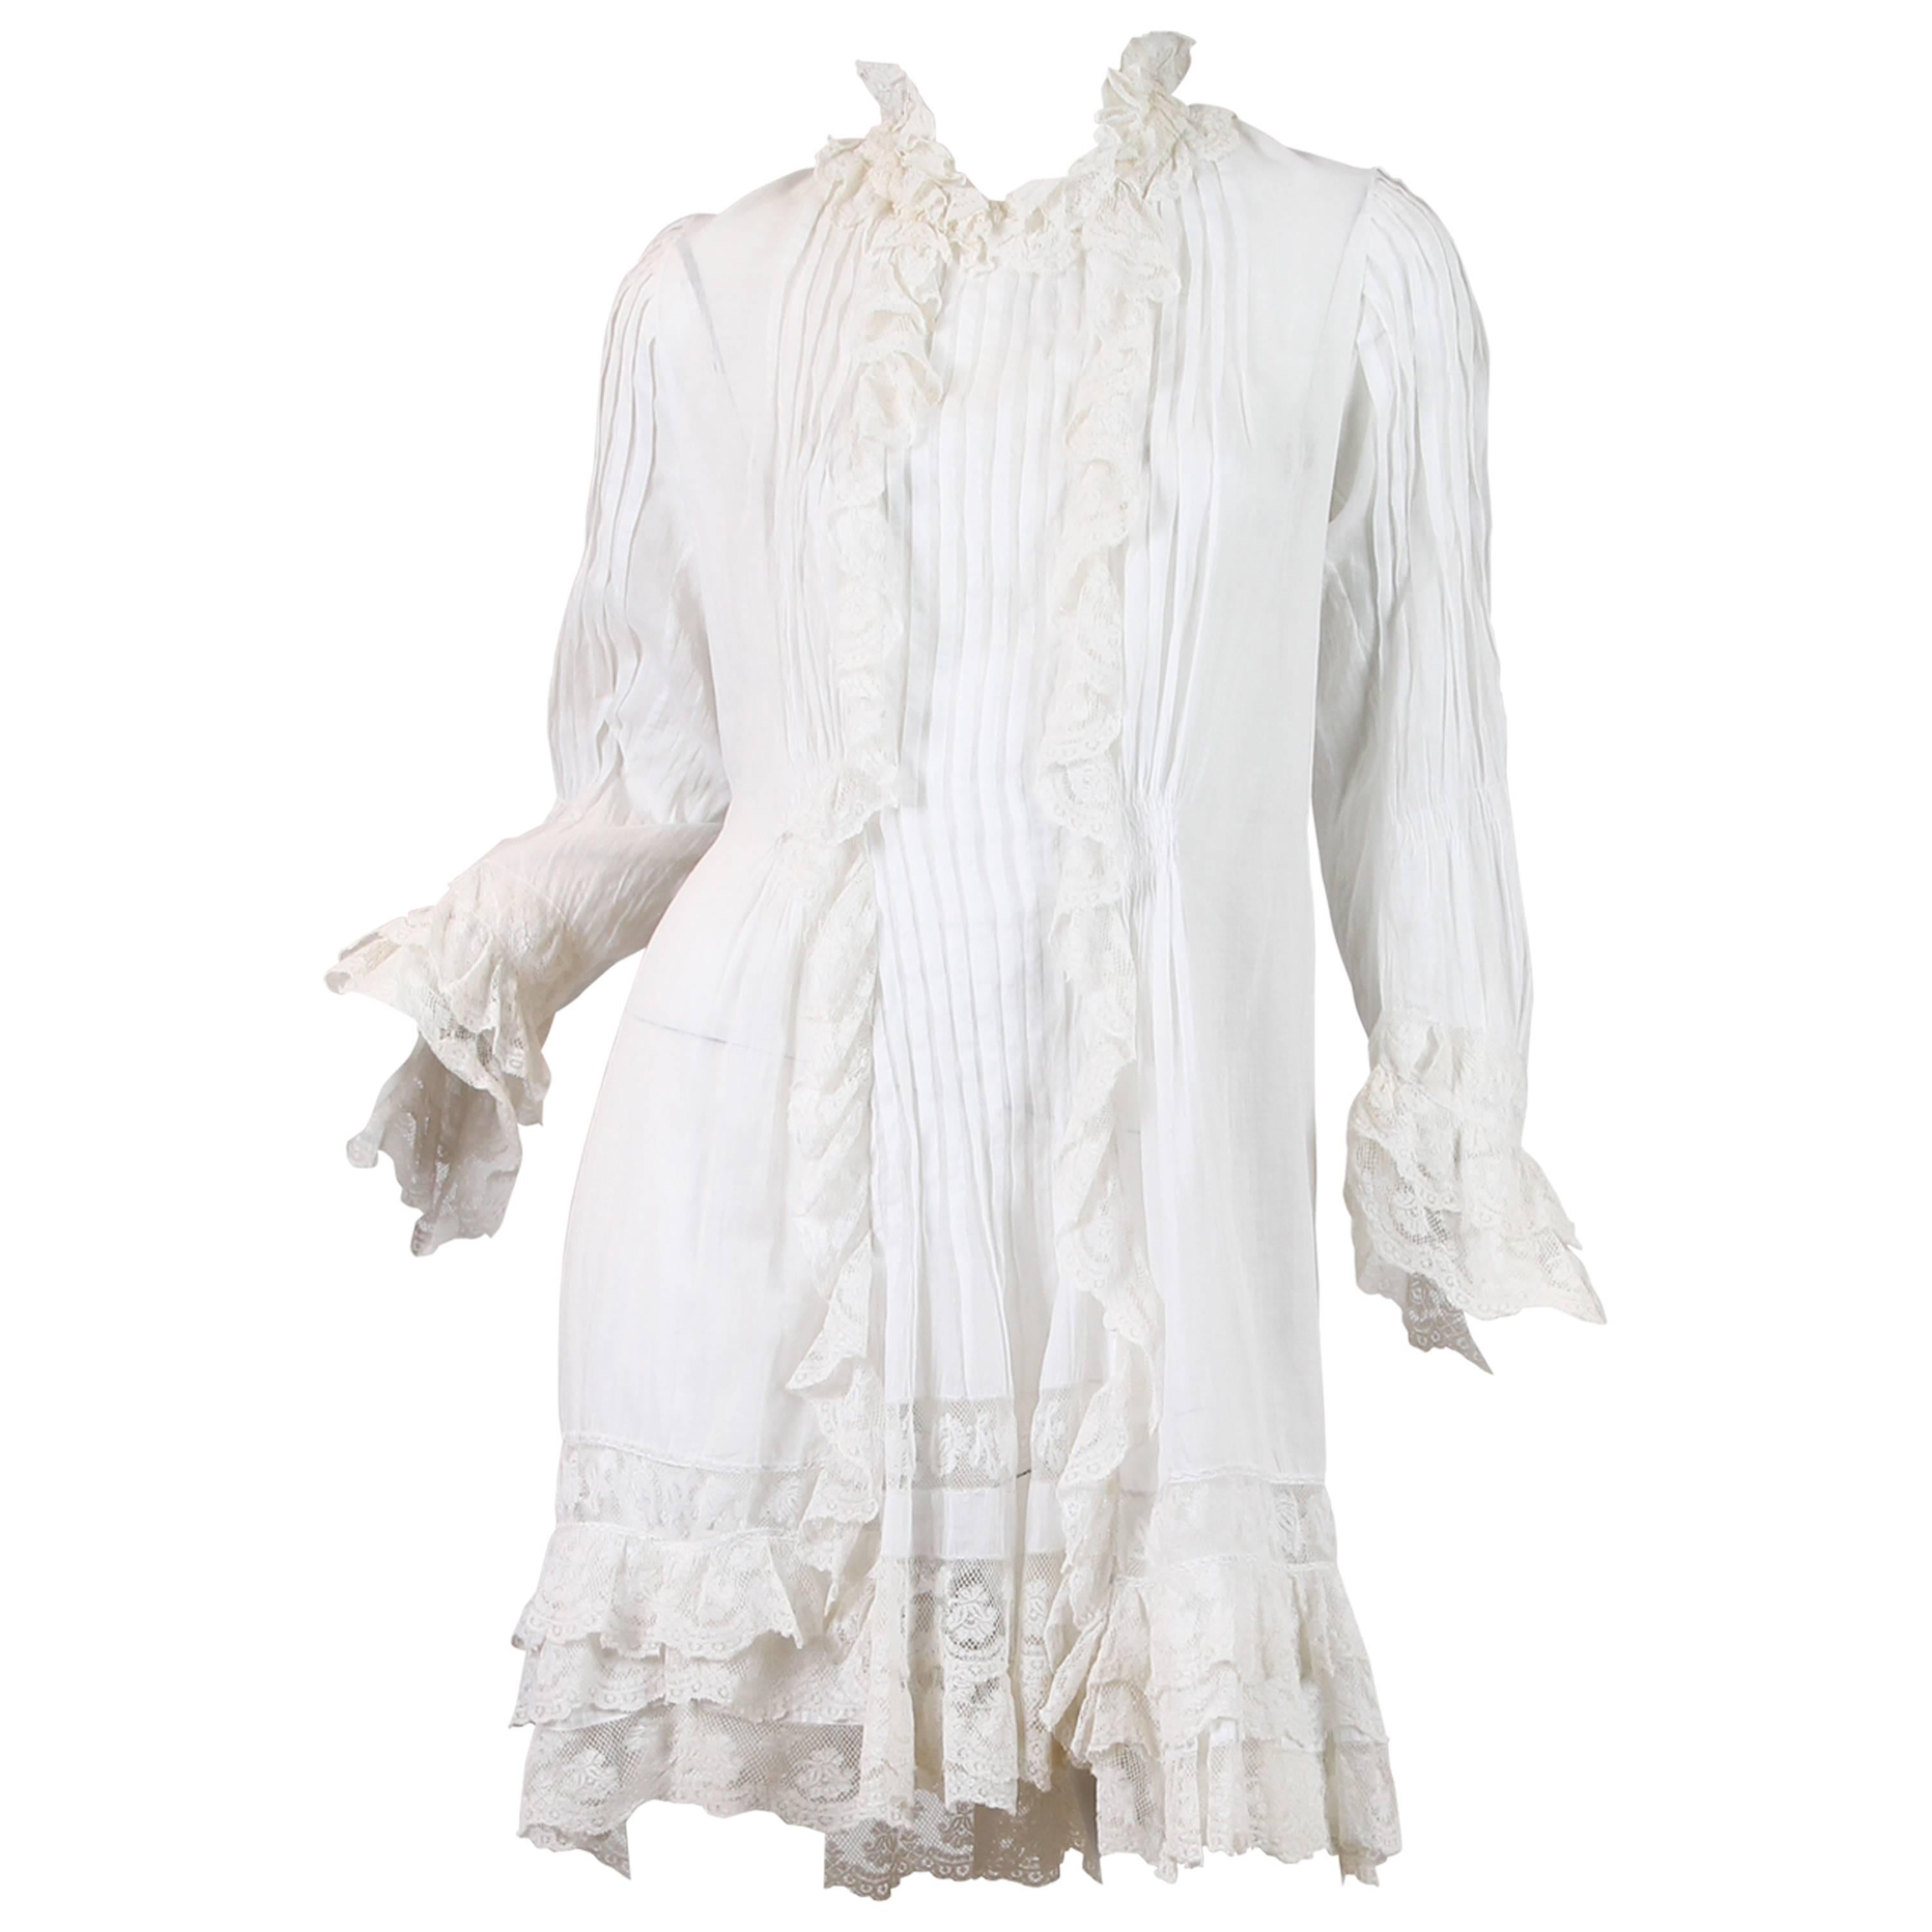 1870-80 Hand Pintucked Cotton and Lace Jacket